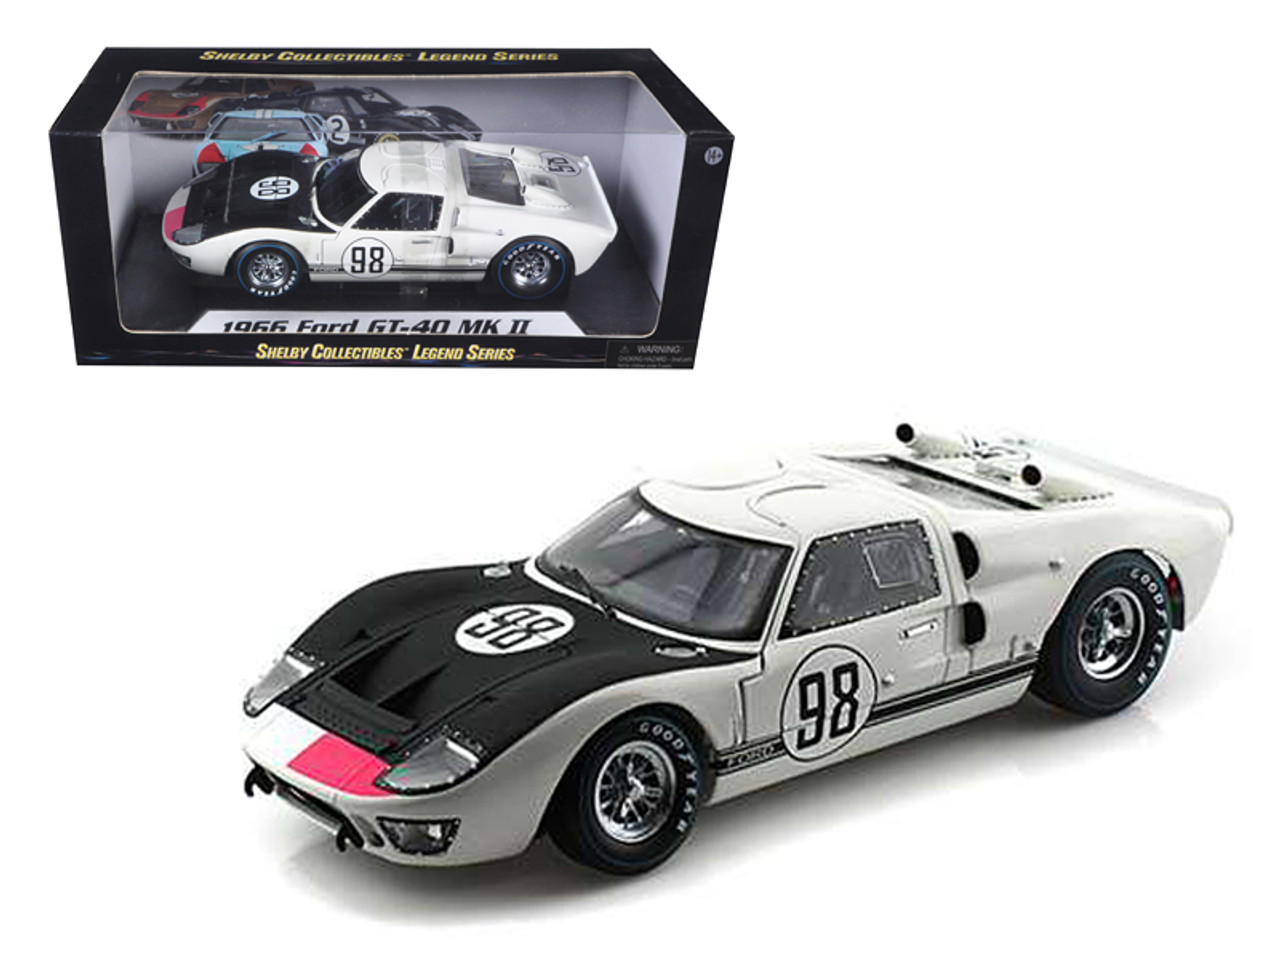 1/18 Shelby Collectibles 1966 Ford GT-40 MK 2 #98 (White) Diecast Car Model